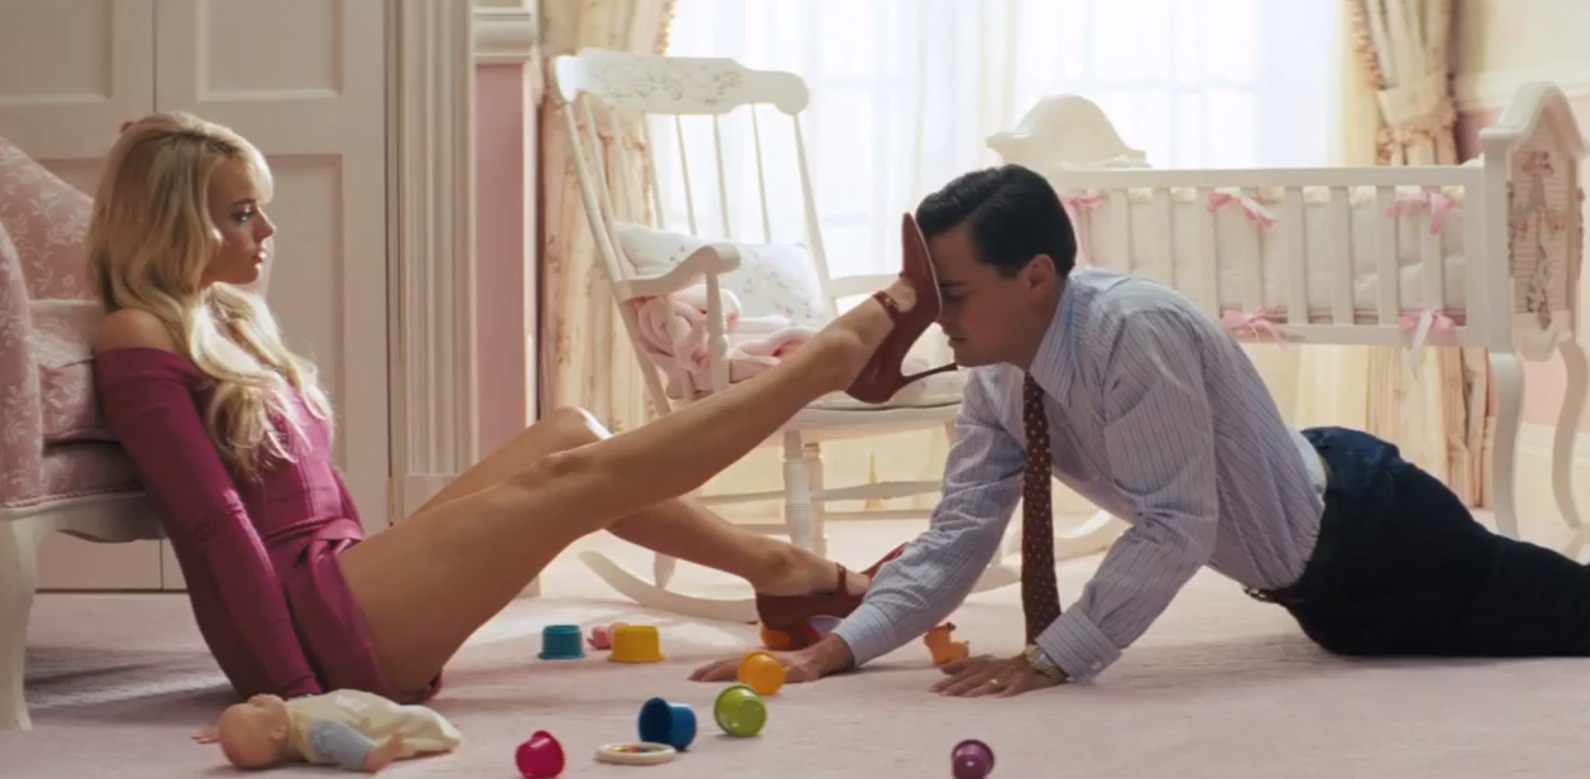 The-Wolf-of-Wall-Street-dicaprio-margot-robbie1.jpg